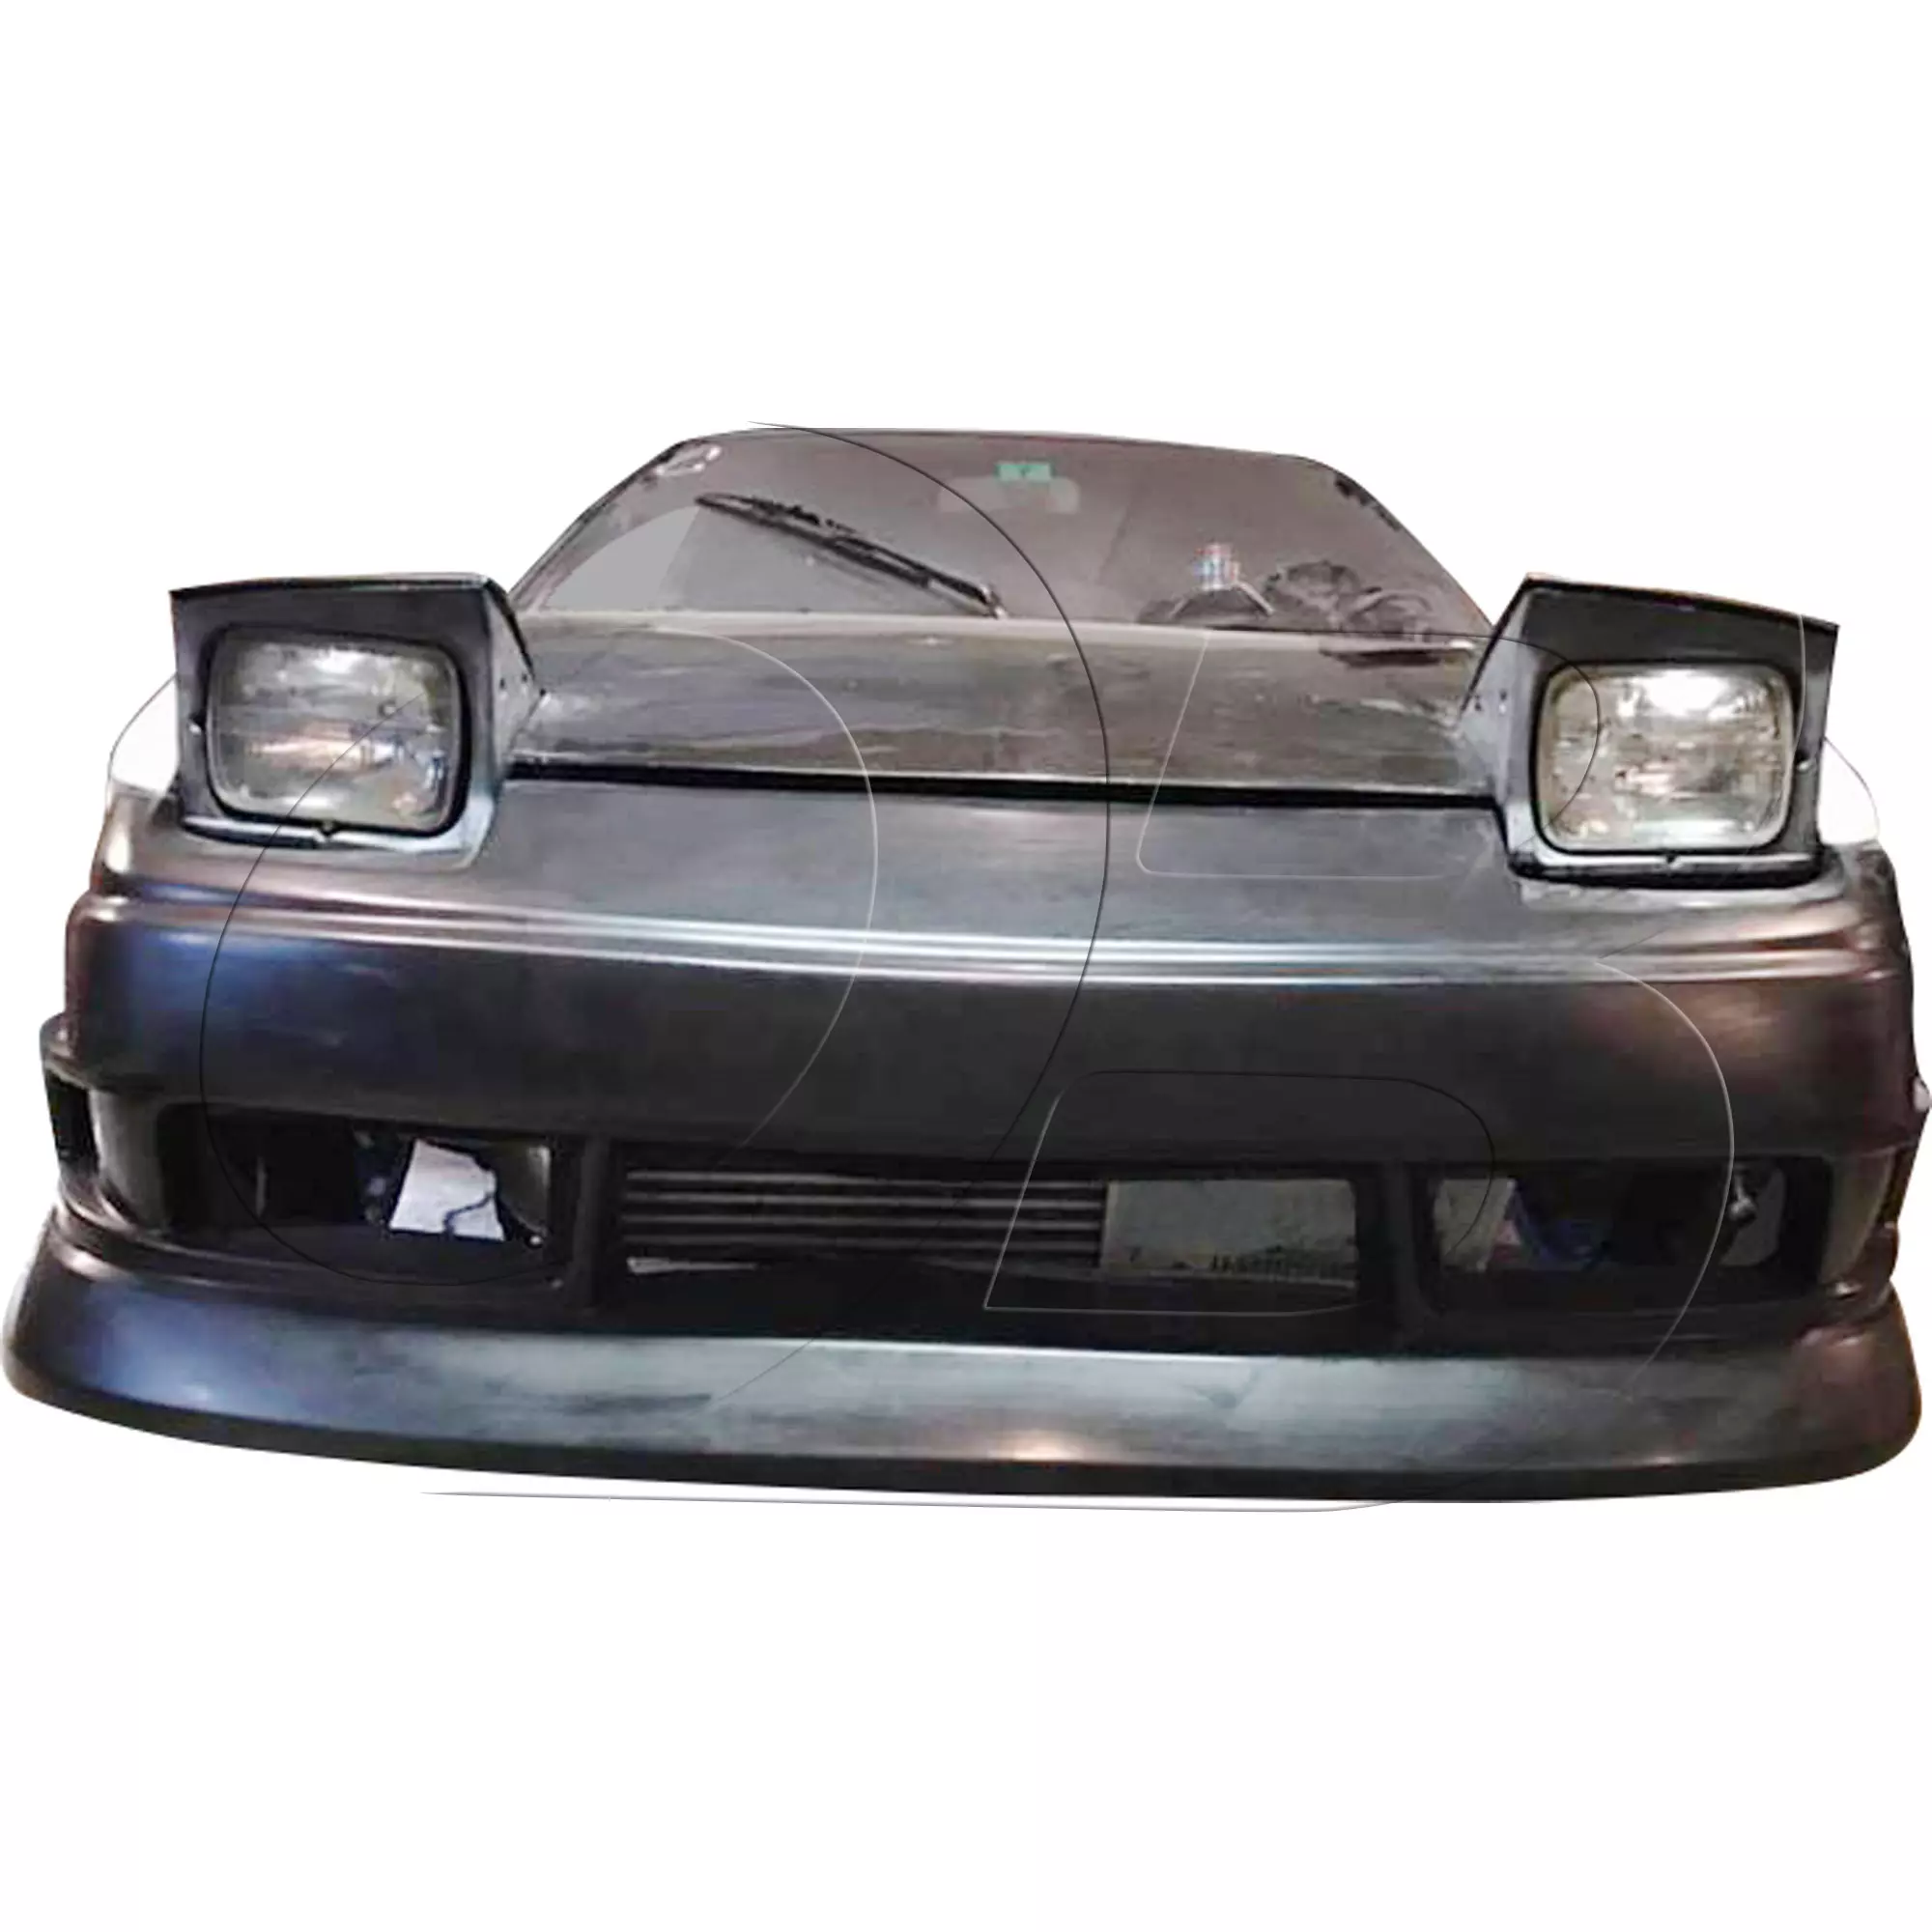 KBD Urethane Bsport2 Style 4pc Full Body Kit > Nissan 240SX 1989-1994 > 2dr Coupe - Image 13